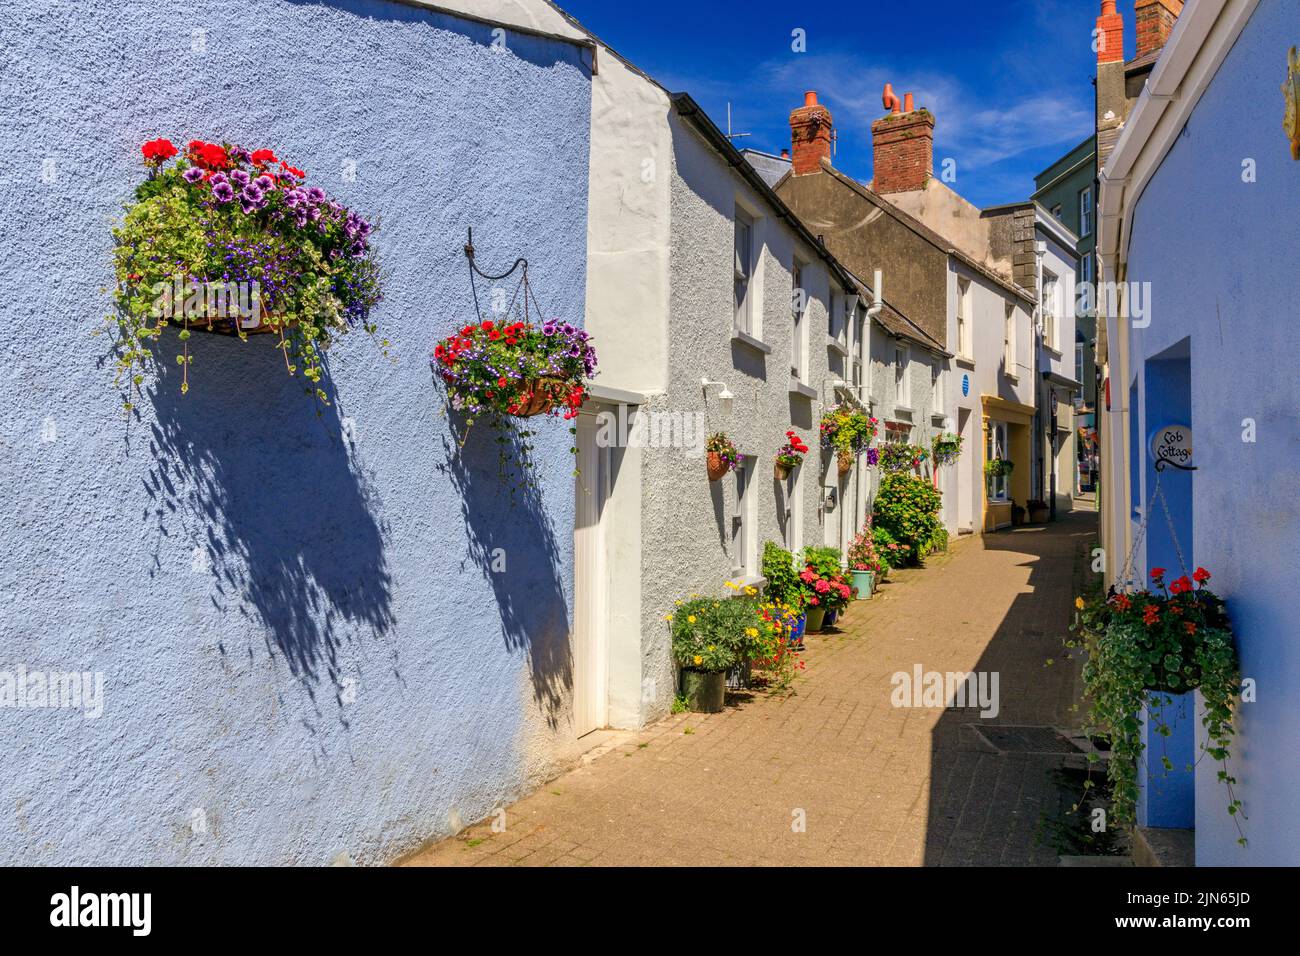 A row of colourful cottages with hanging baskets in Cob Lane, Tenby, Pembrokeshire, Wales, UK Stock Photo